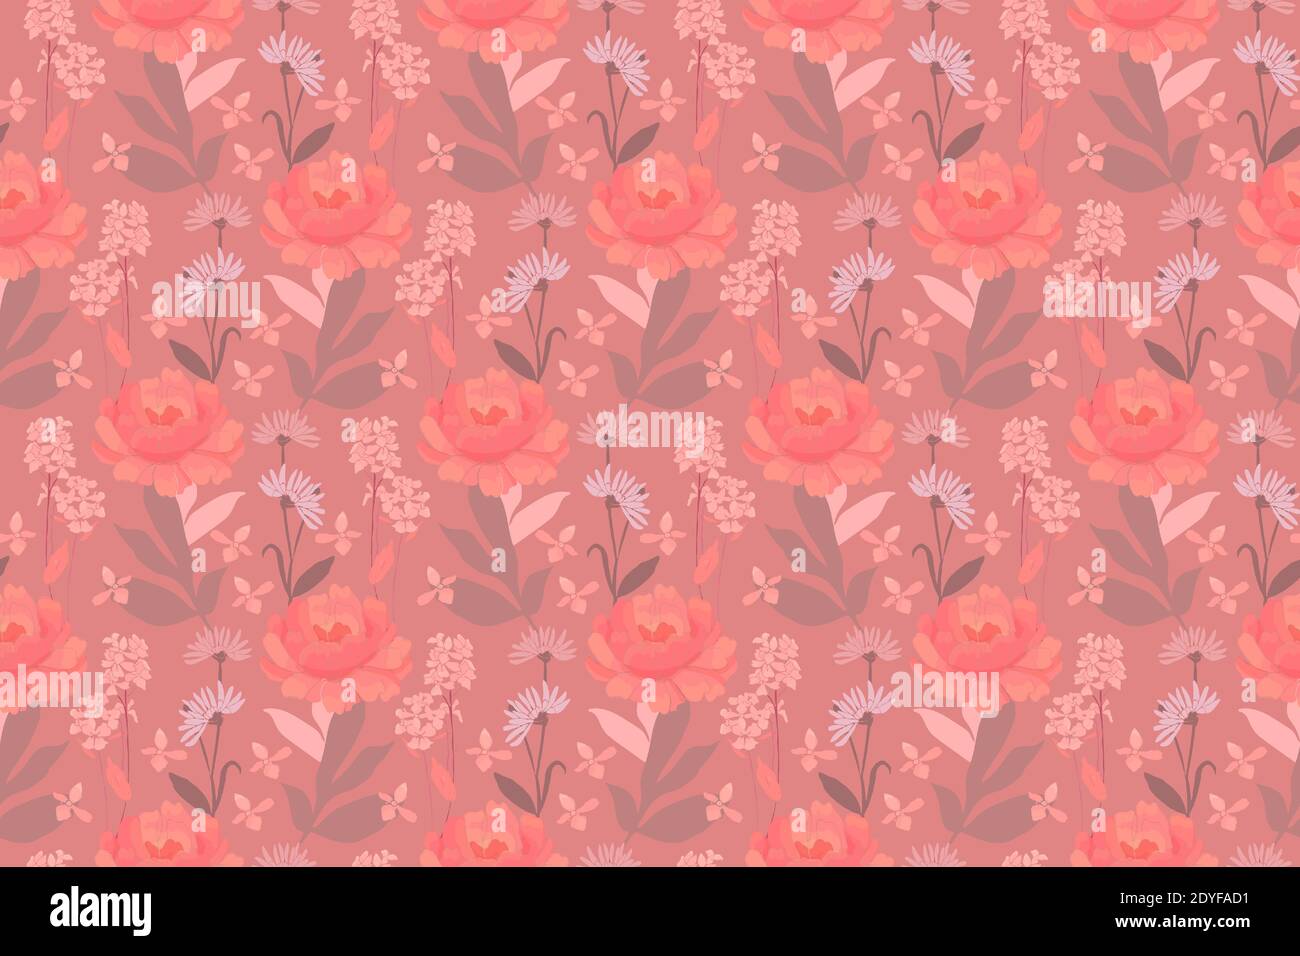 Vector floral seamless pattern. Pink, coral color, coffee color flowers, leaves. Stock Vector